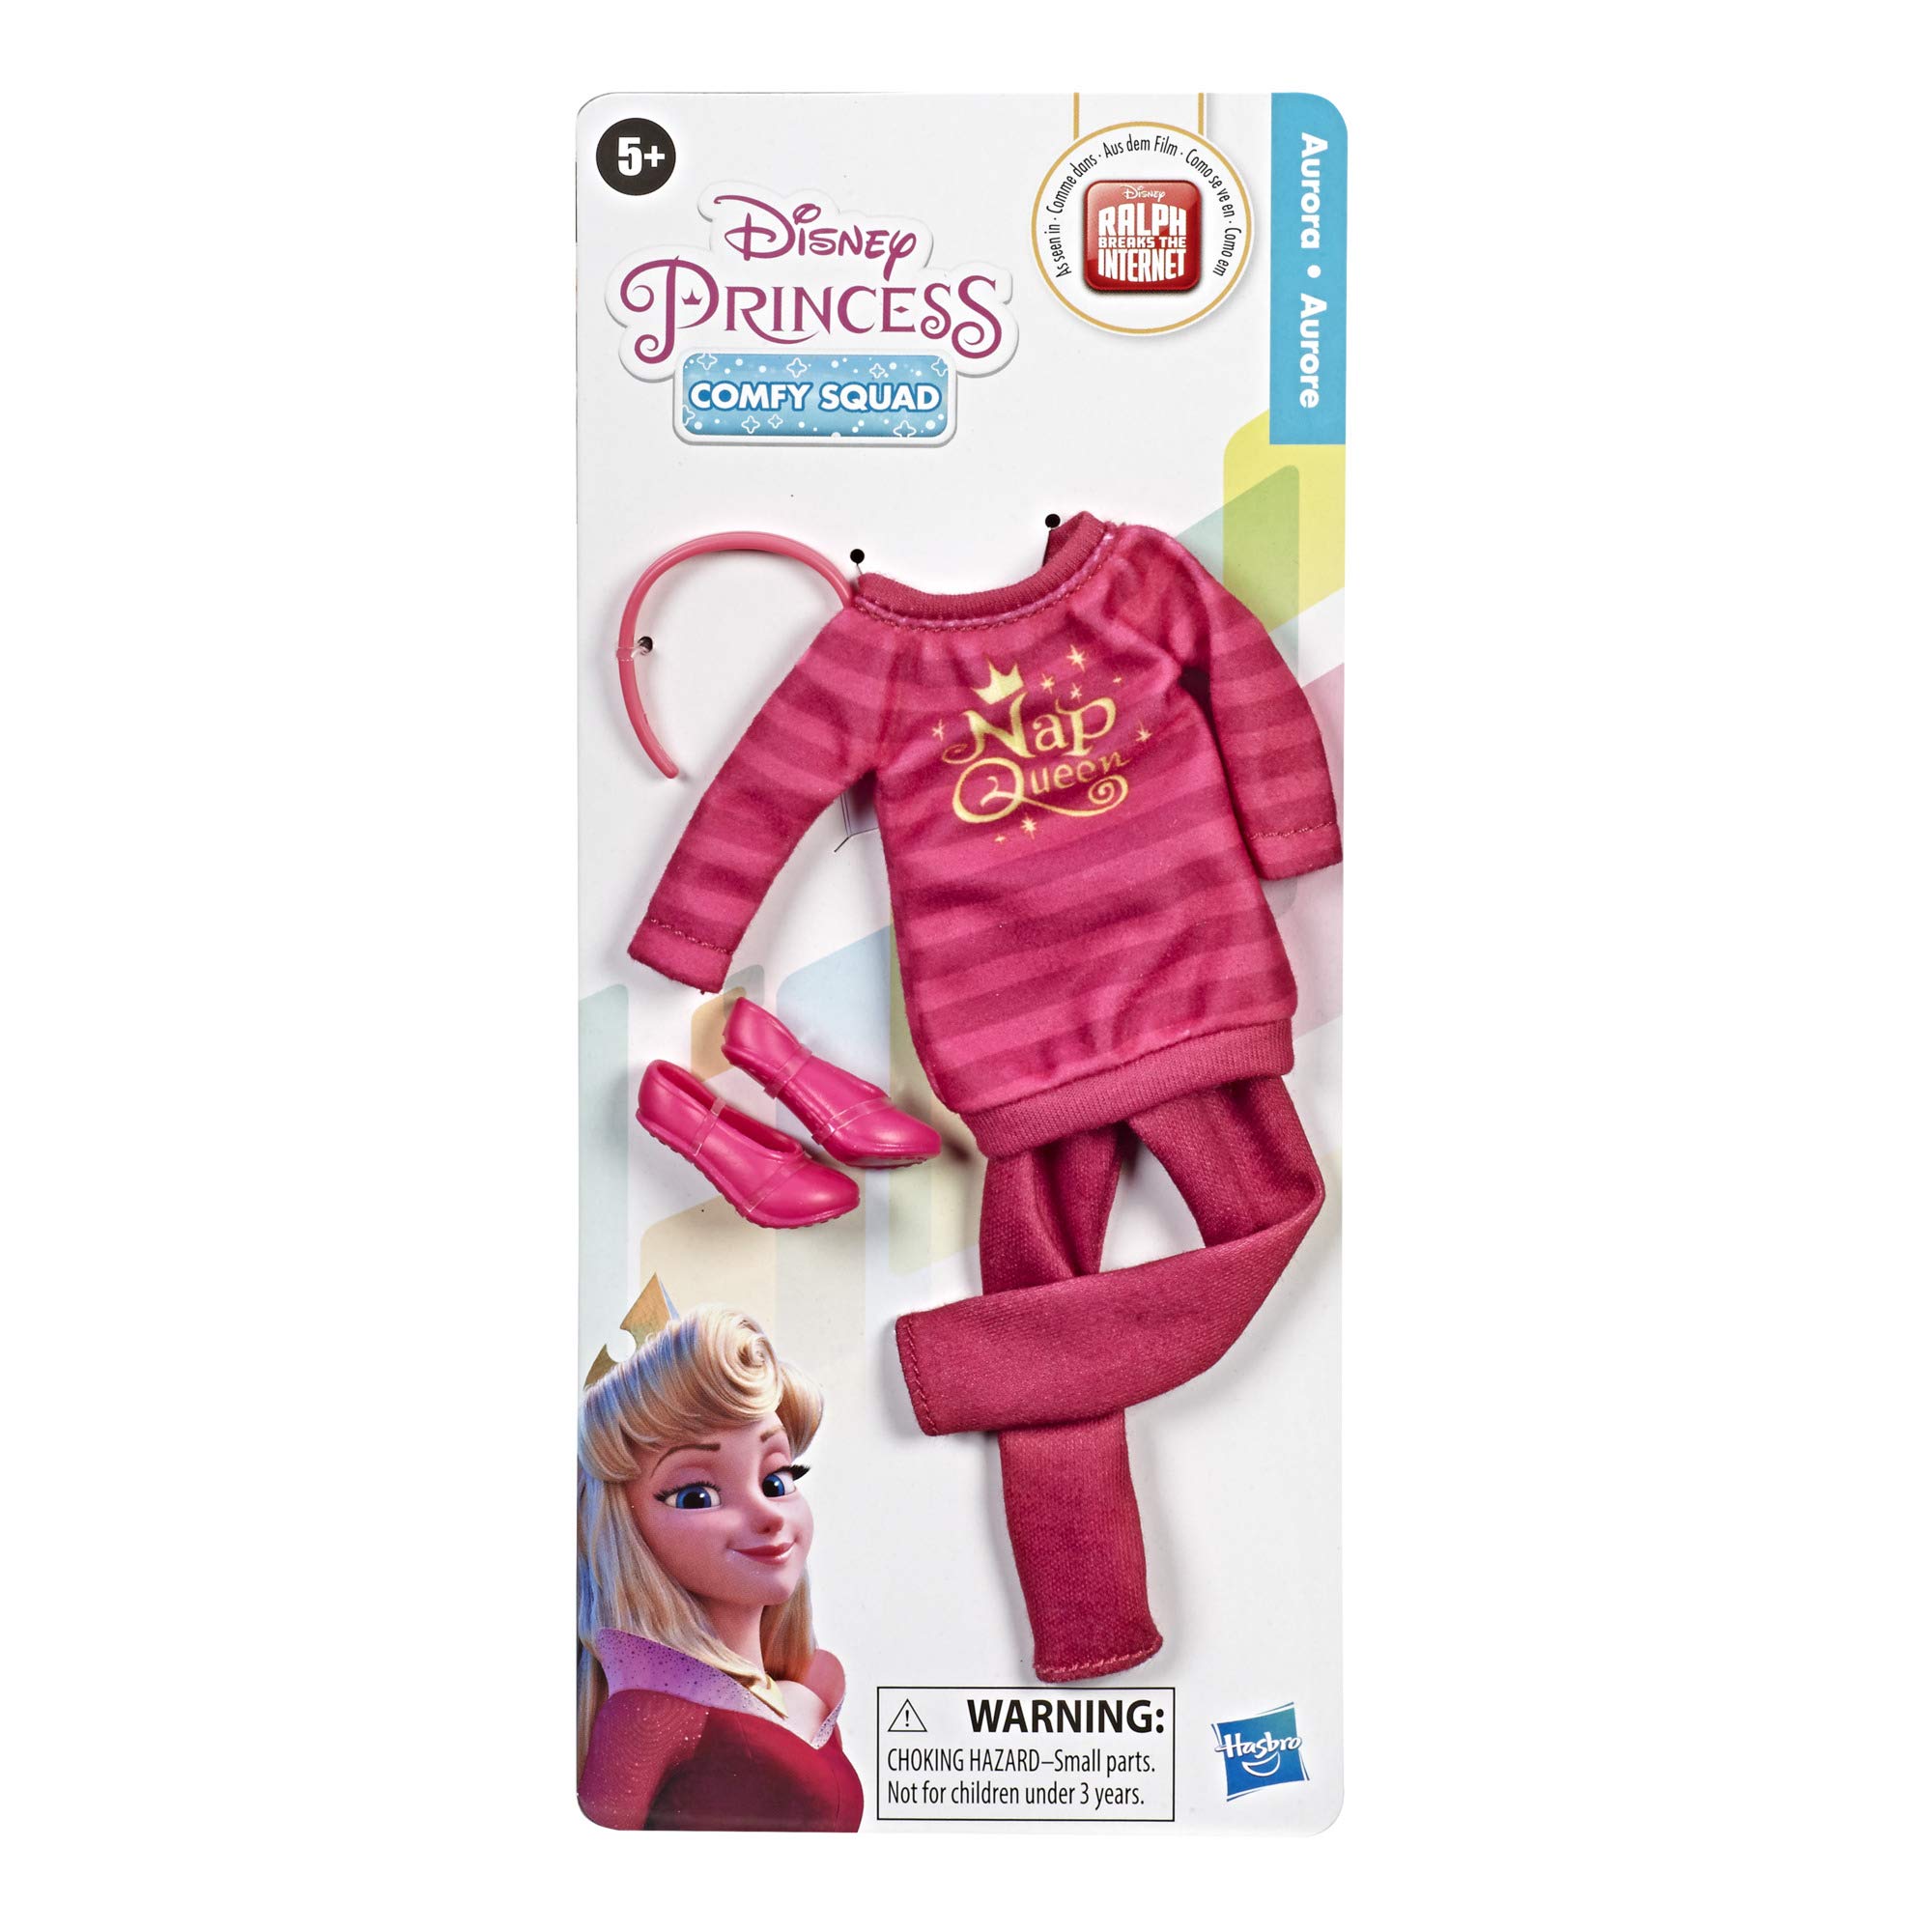 Disney Princess Comfy Squad Fashion Pack for Aurora Doll, Clothes for Disney Fashion Doll Inspired by Ralph Breaks The Internet Movie